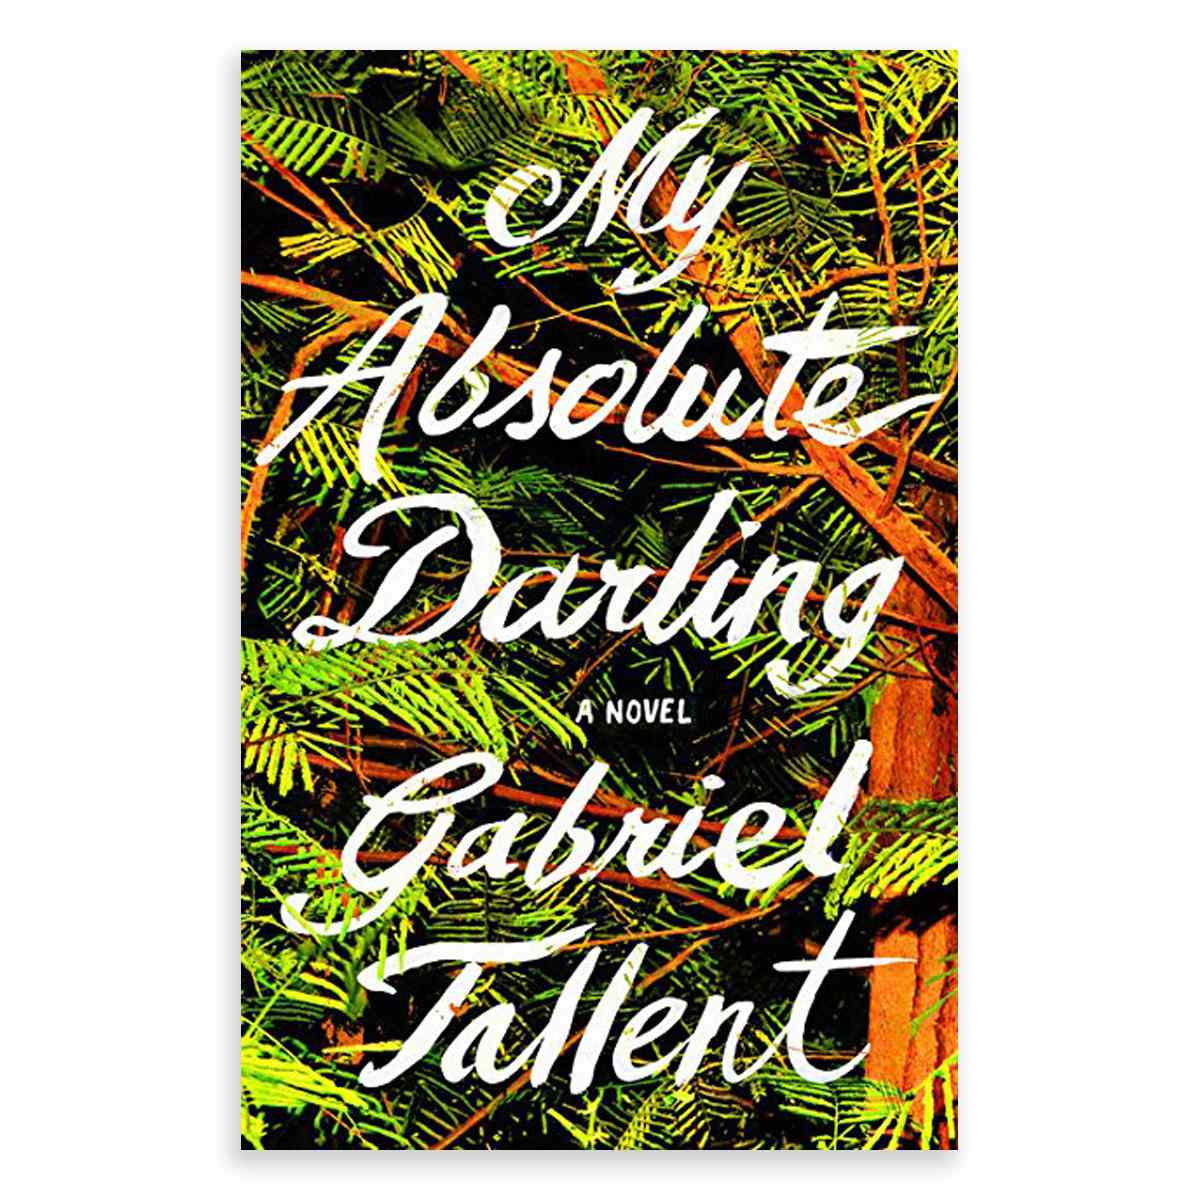 MY ABSOLUTE DARLING BY GABRIEL TALLENT